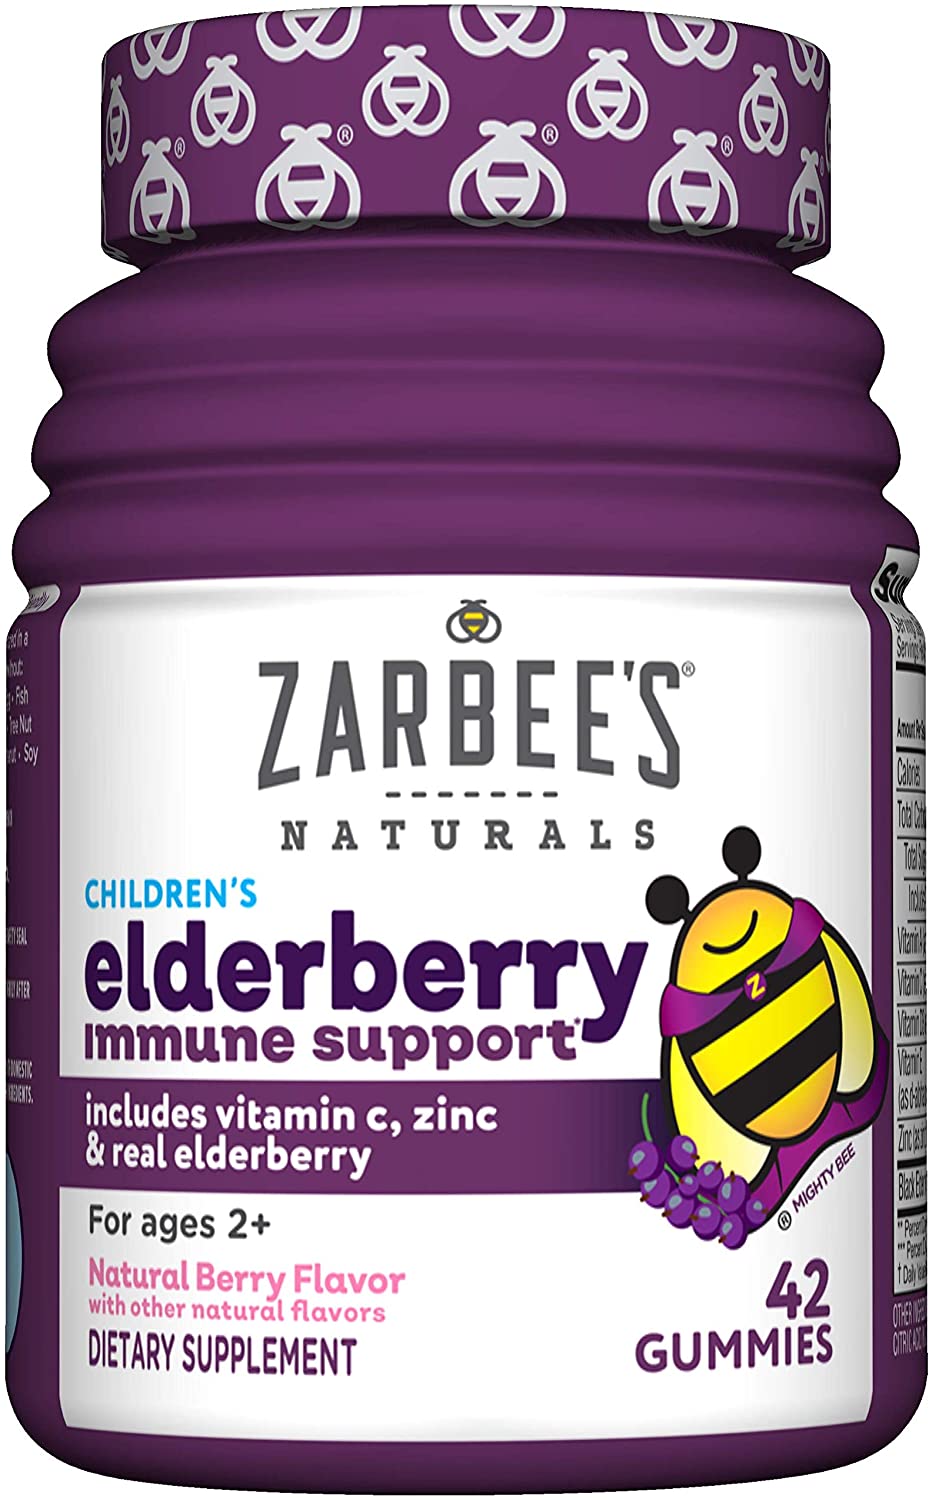 42-Count Zarbee's Naturals Children's Elderberry Immune Support Gummies (Natural Berry) $7.70 w/ S&S + Free Shipping w/ Prime or on $25+